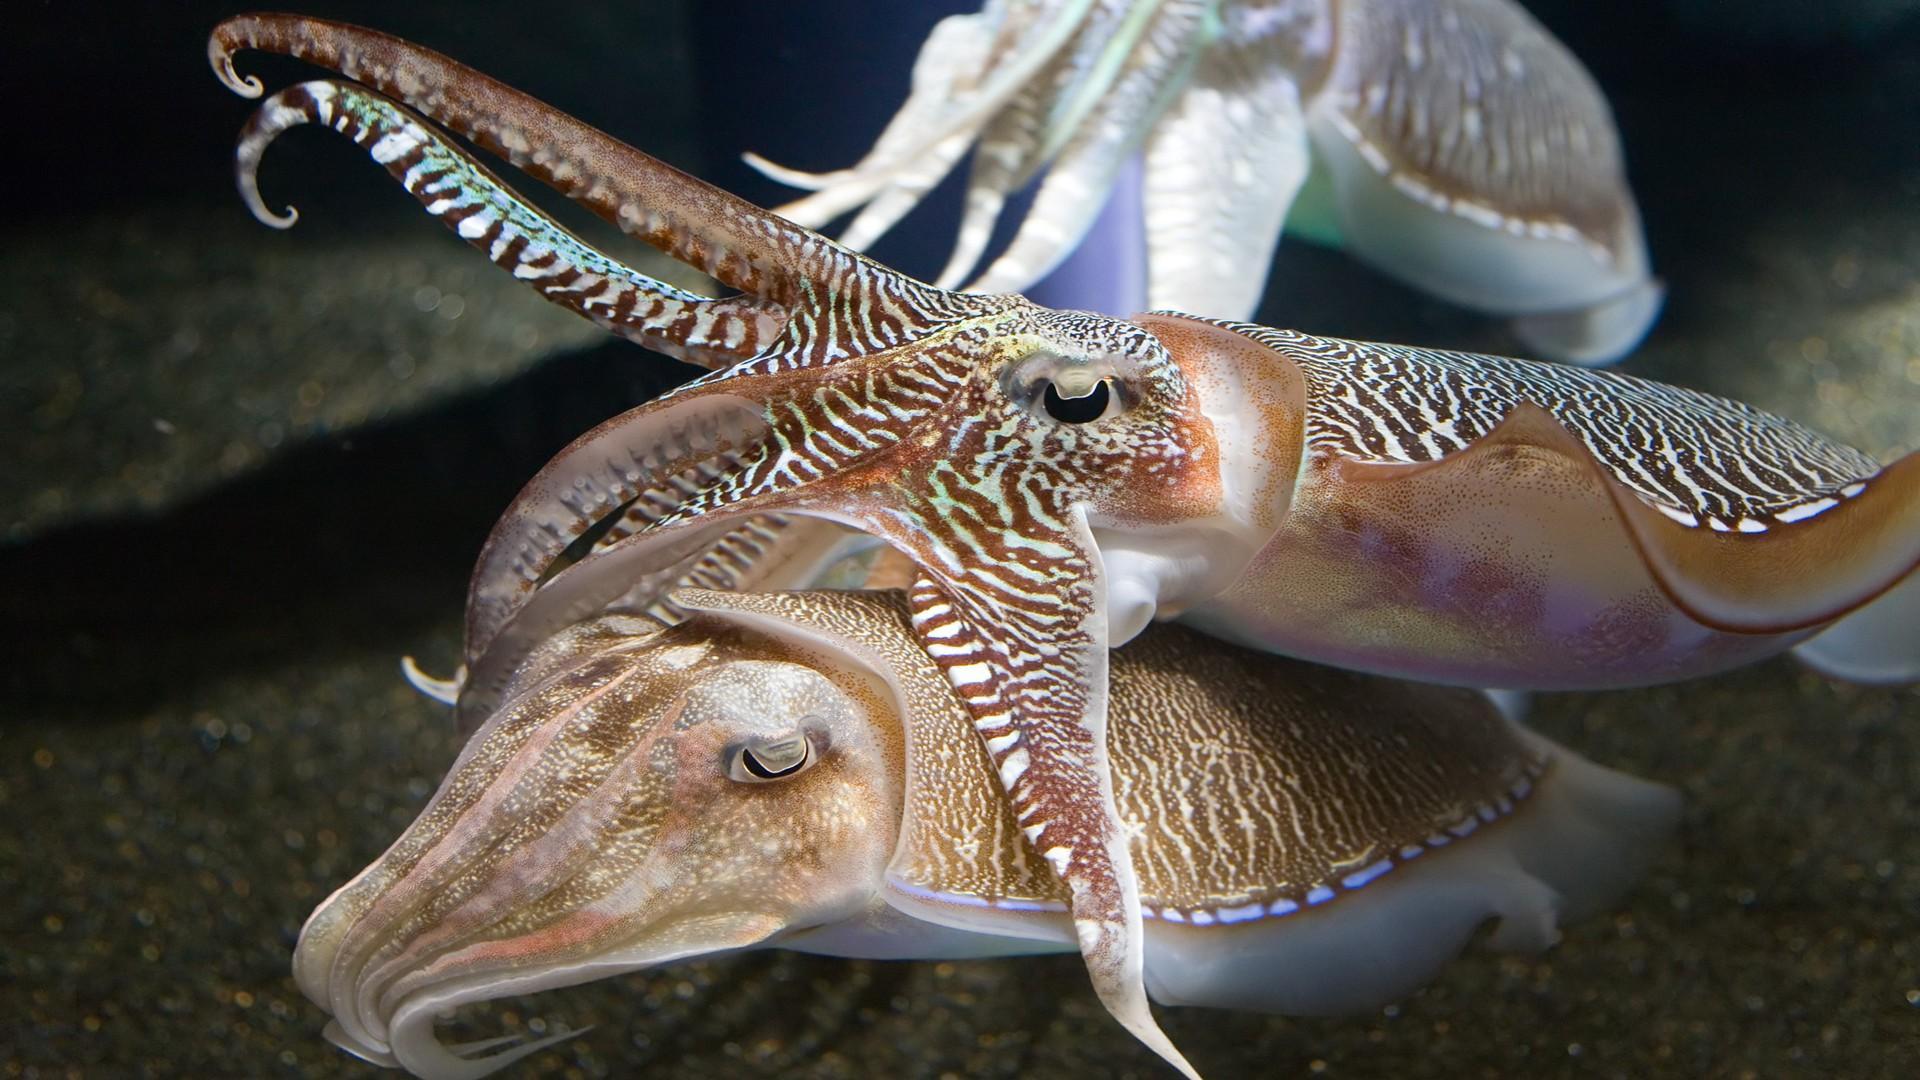 Cuttlefishes Hd Wallpaper 4k Download Full Screen, Cuttlefishes, Animal